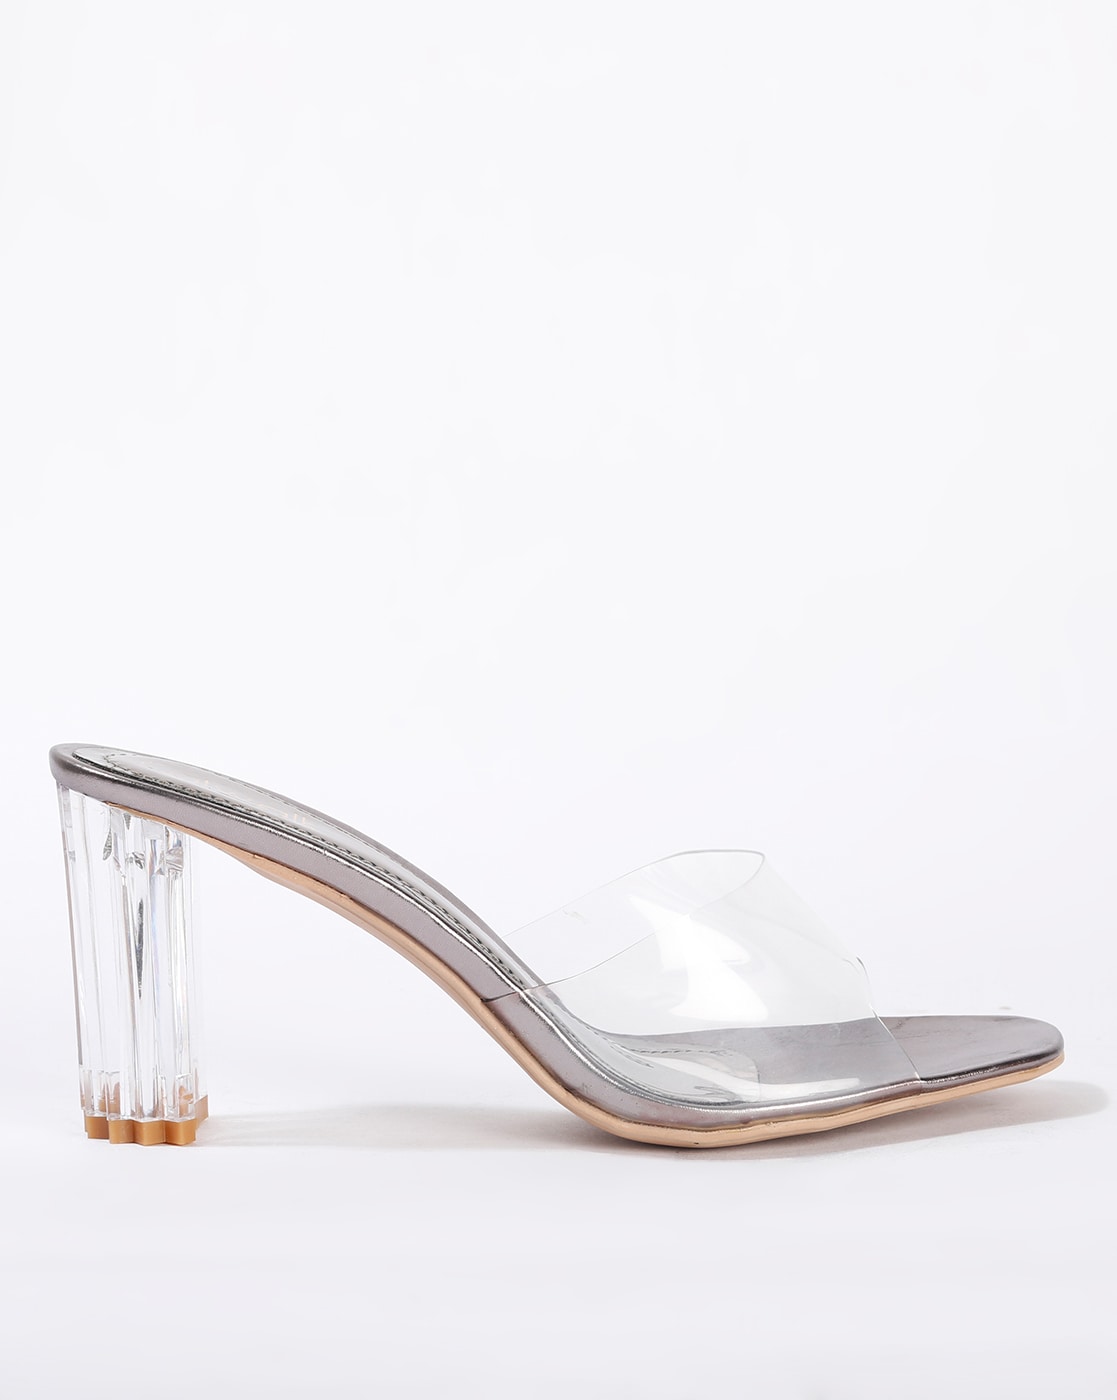 Rhinestone Decor Clear Heeled Mule Sandals | Heels, Casual heels outfit,  Fashion shoes heels